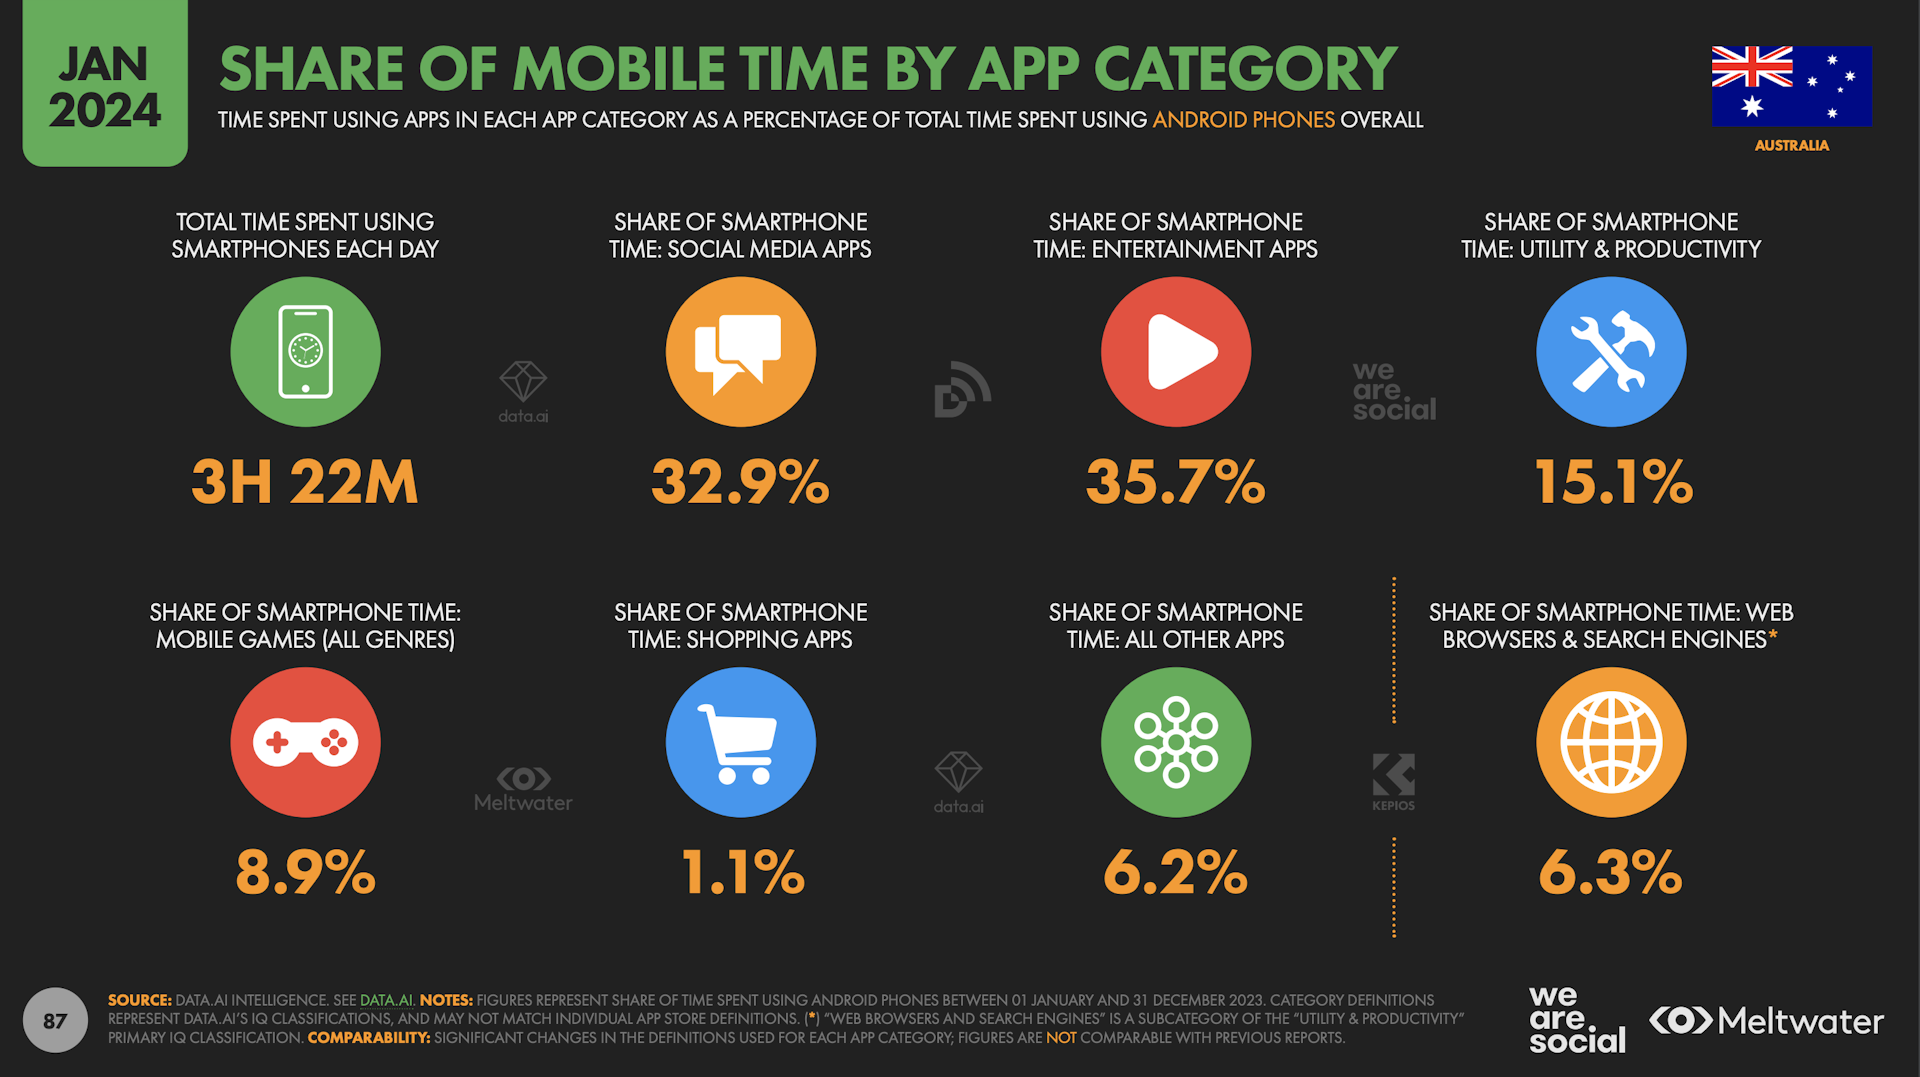 Share of mobile time by app category based on Global Digital Report 2024 for Australia